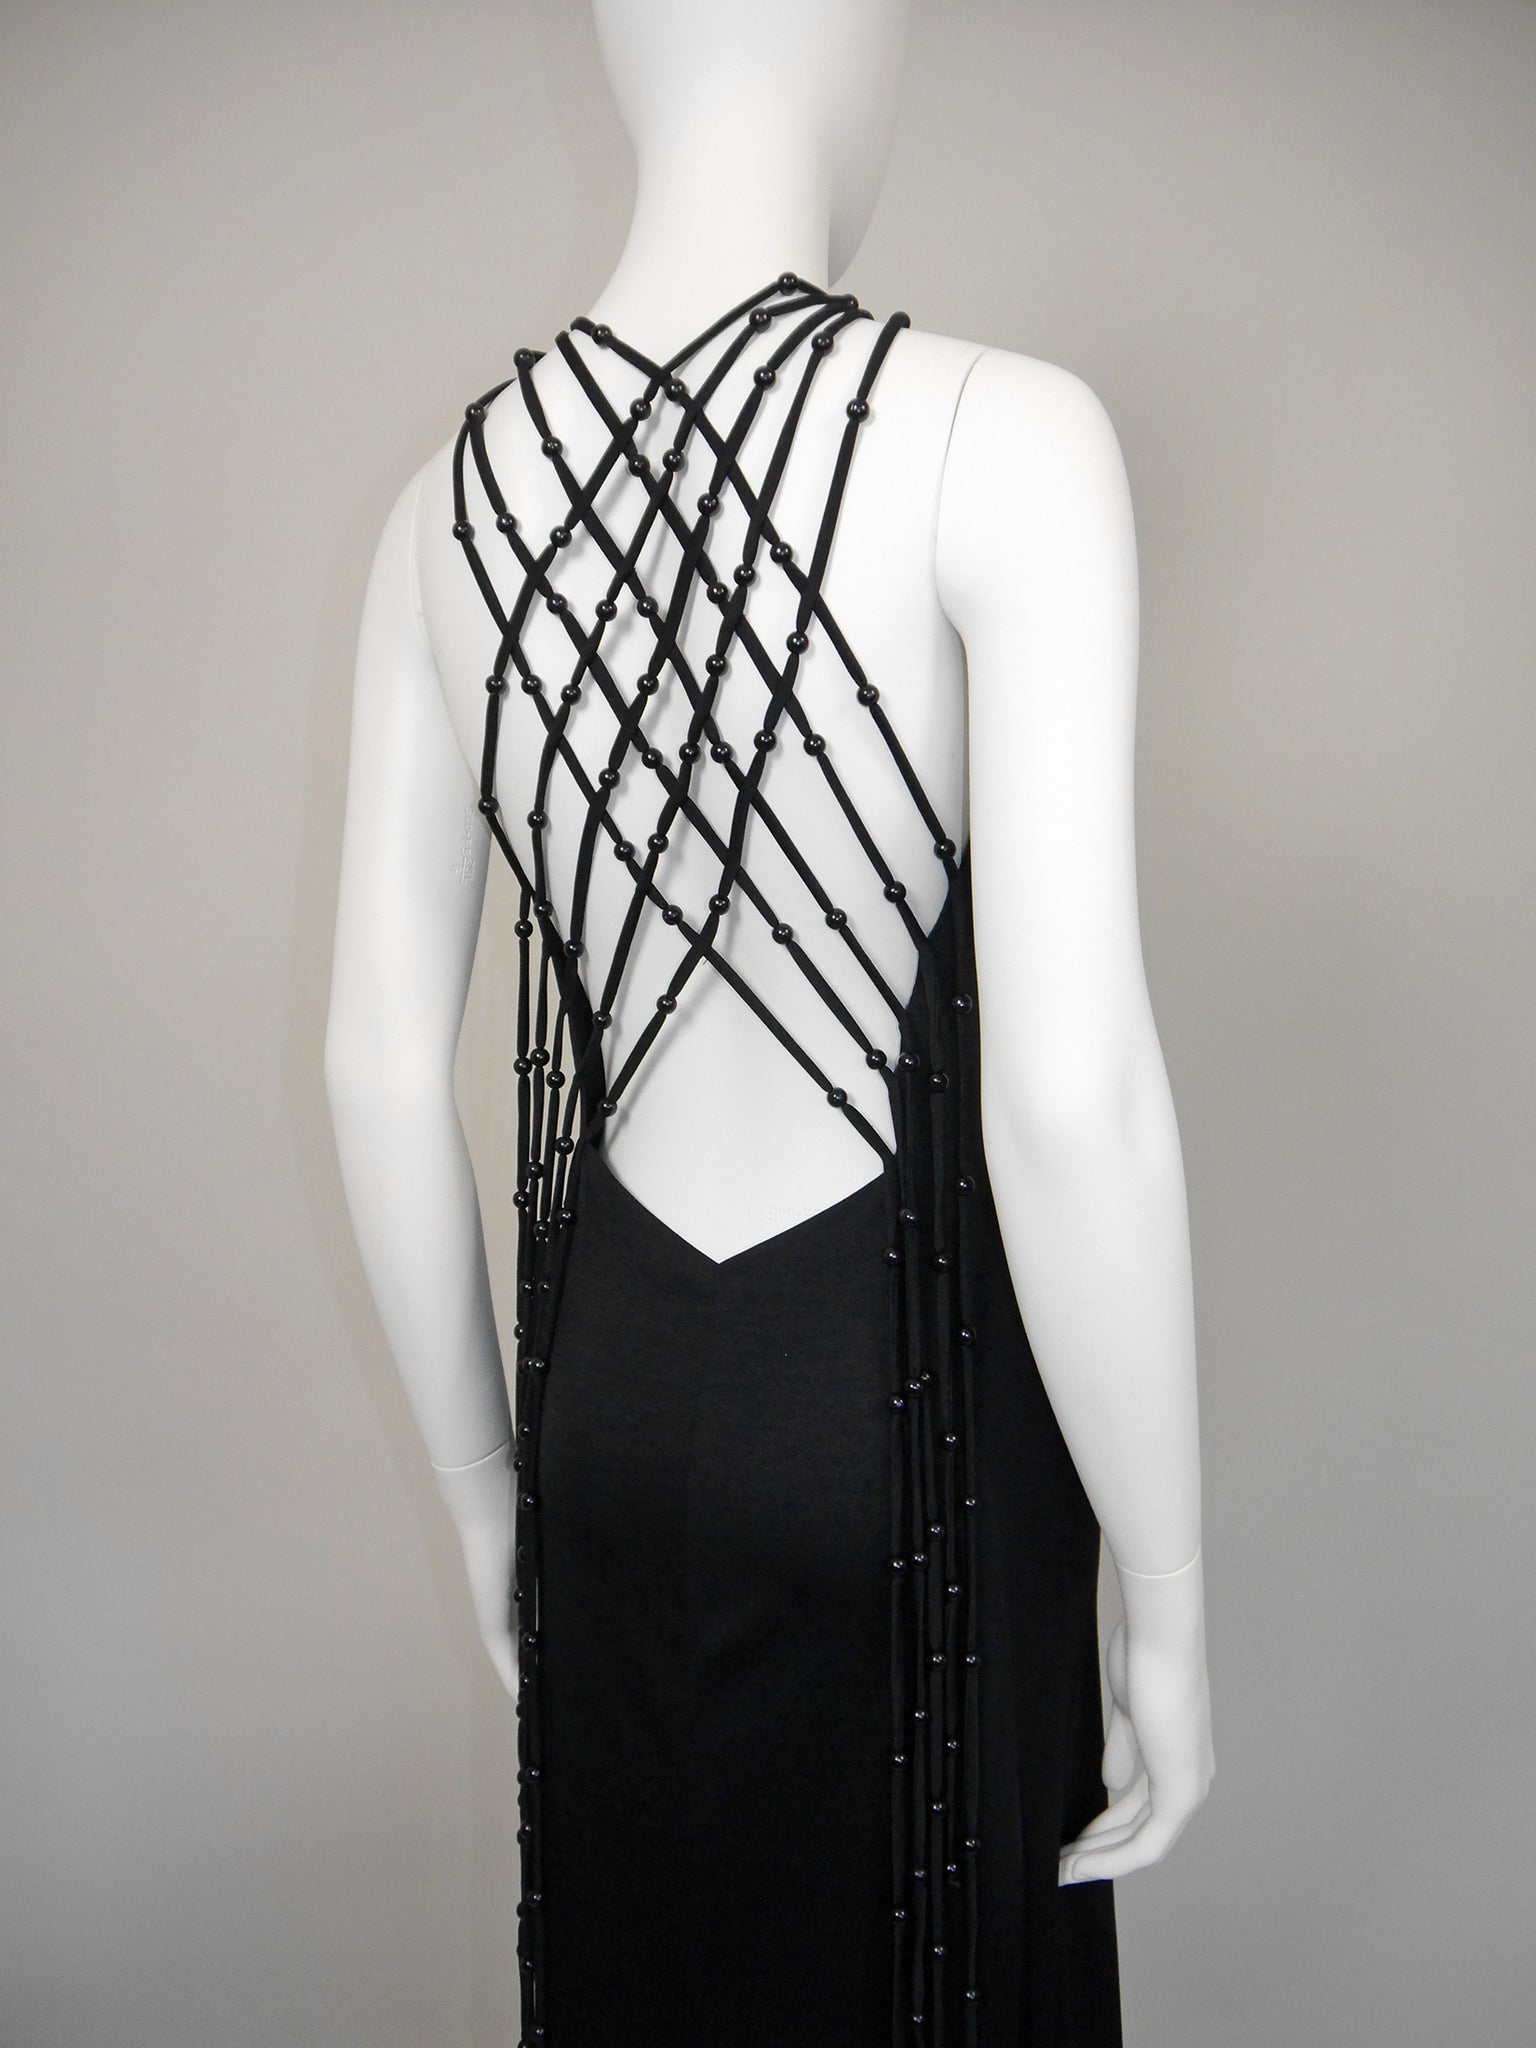 LORIS AZZARO 1970s Vintage "Baba" Beaded Backless Maxi Evening Gown Size S